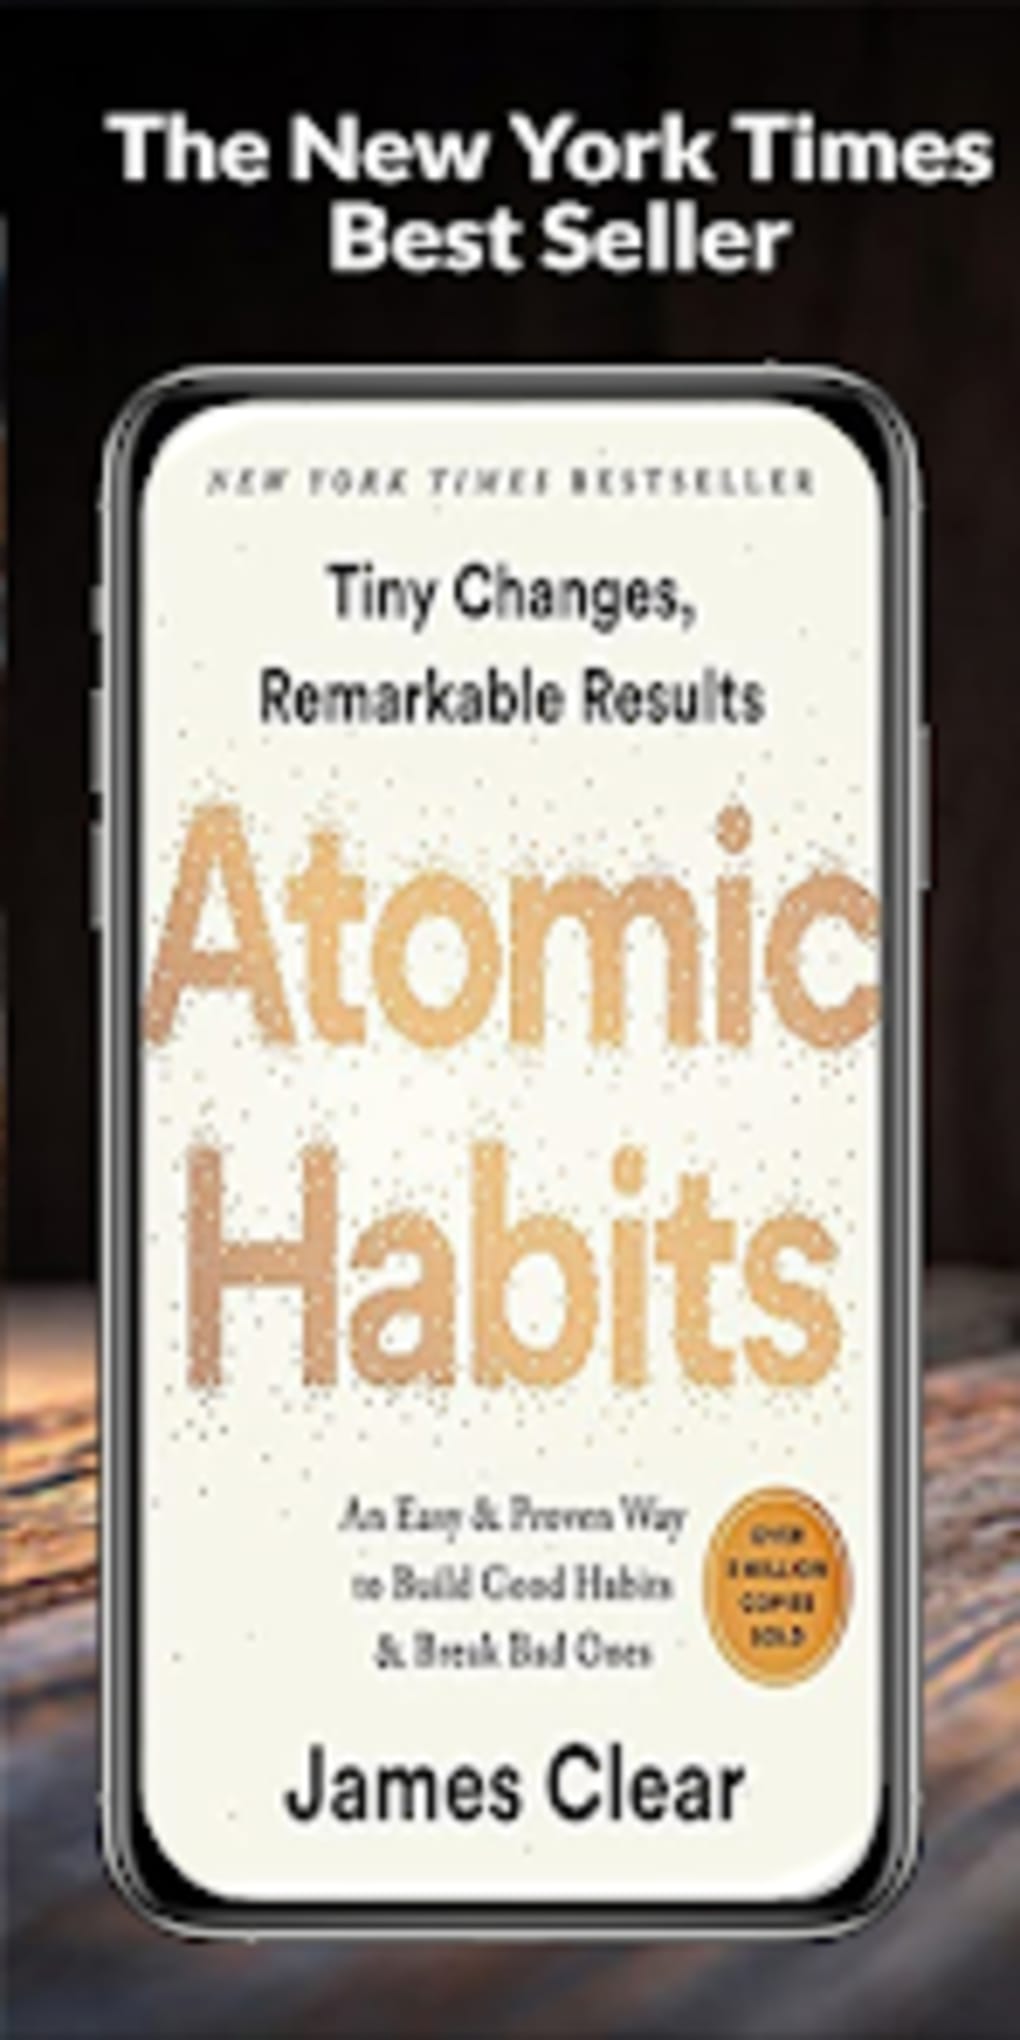 Atomic Habits download the new for android